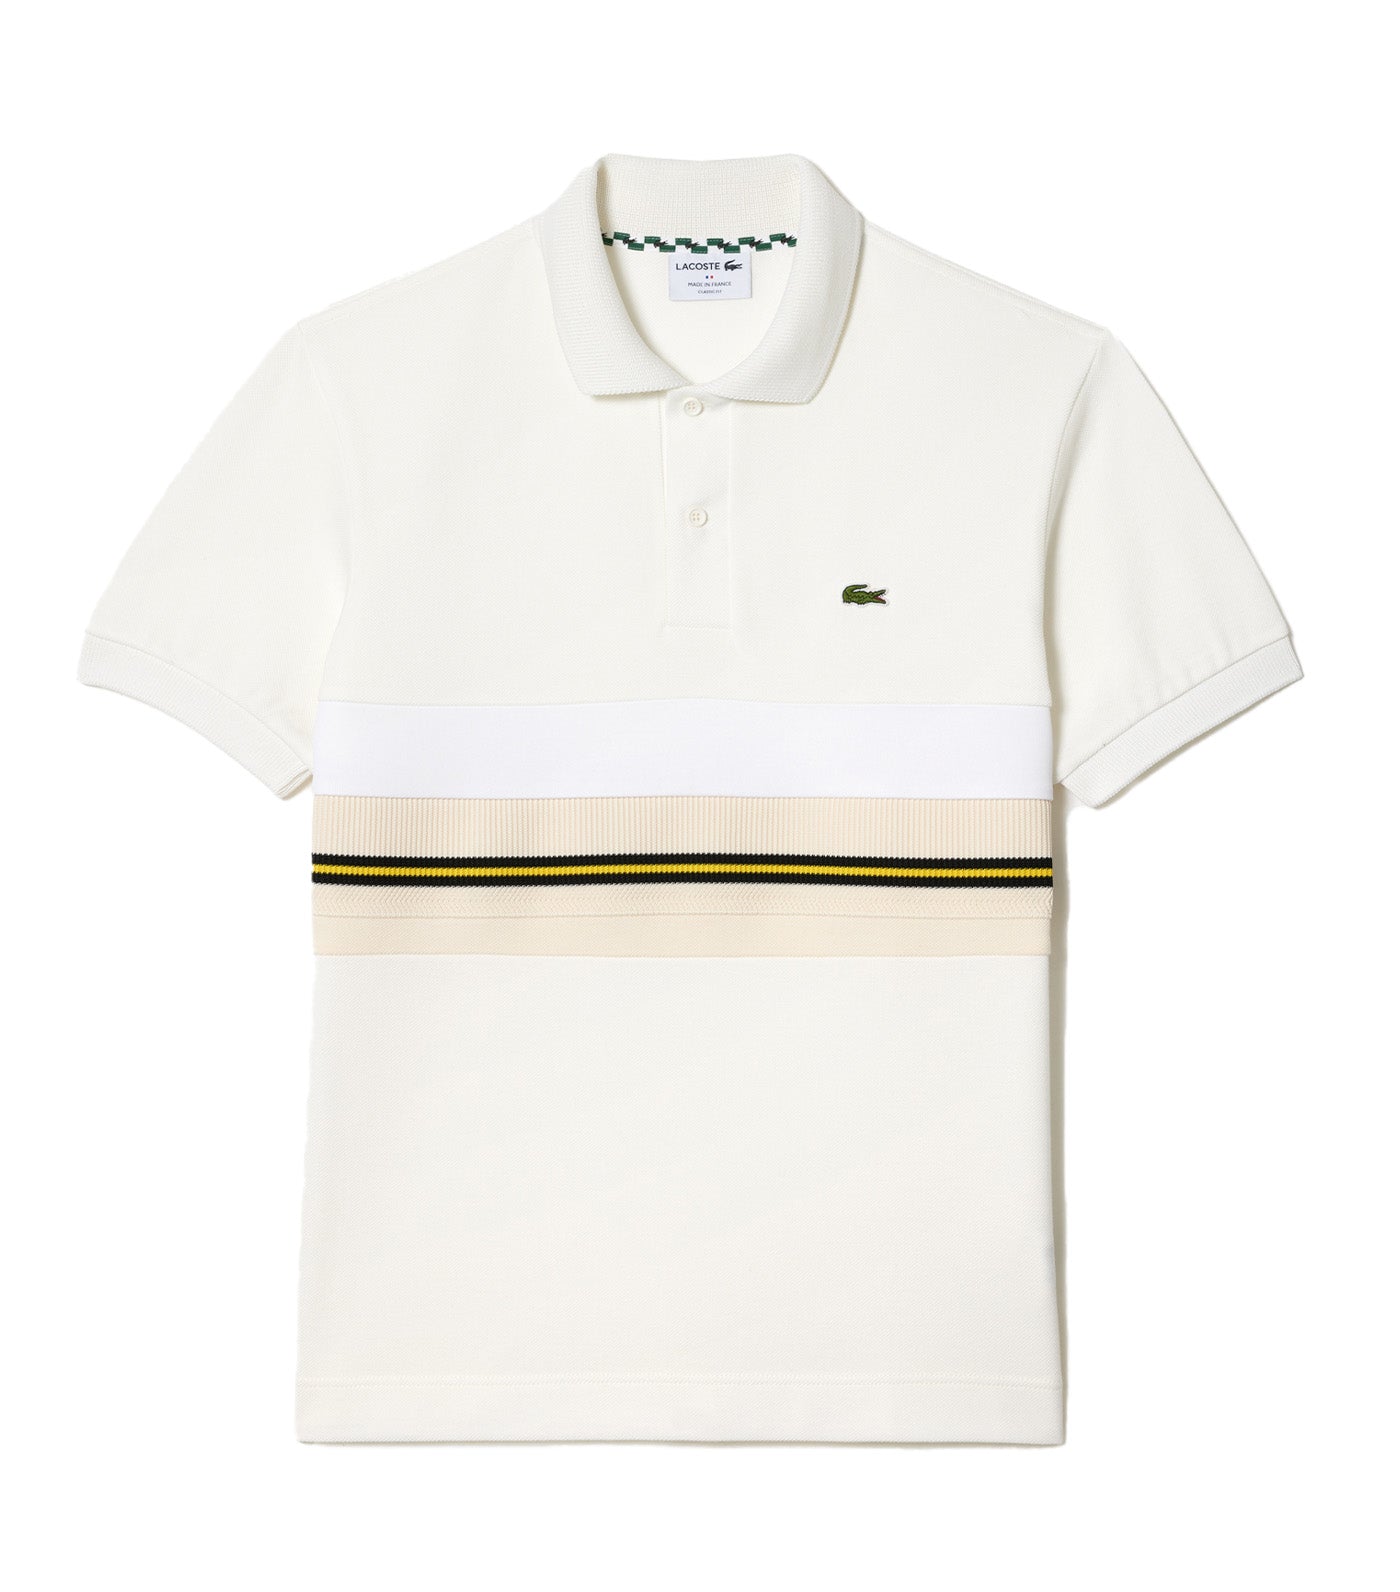 Shirt Contrast Made Flour Stripe French Lacoste Polo